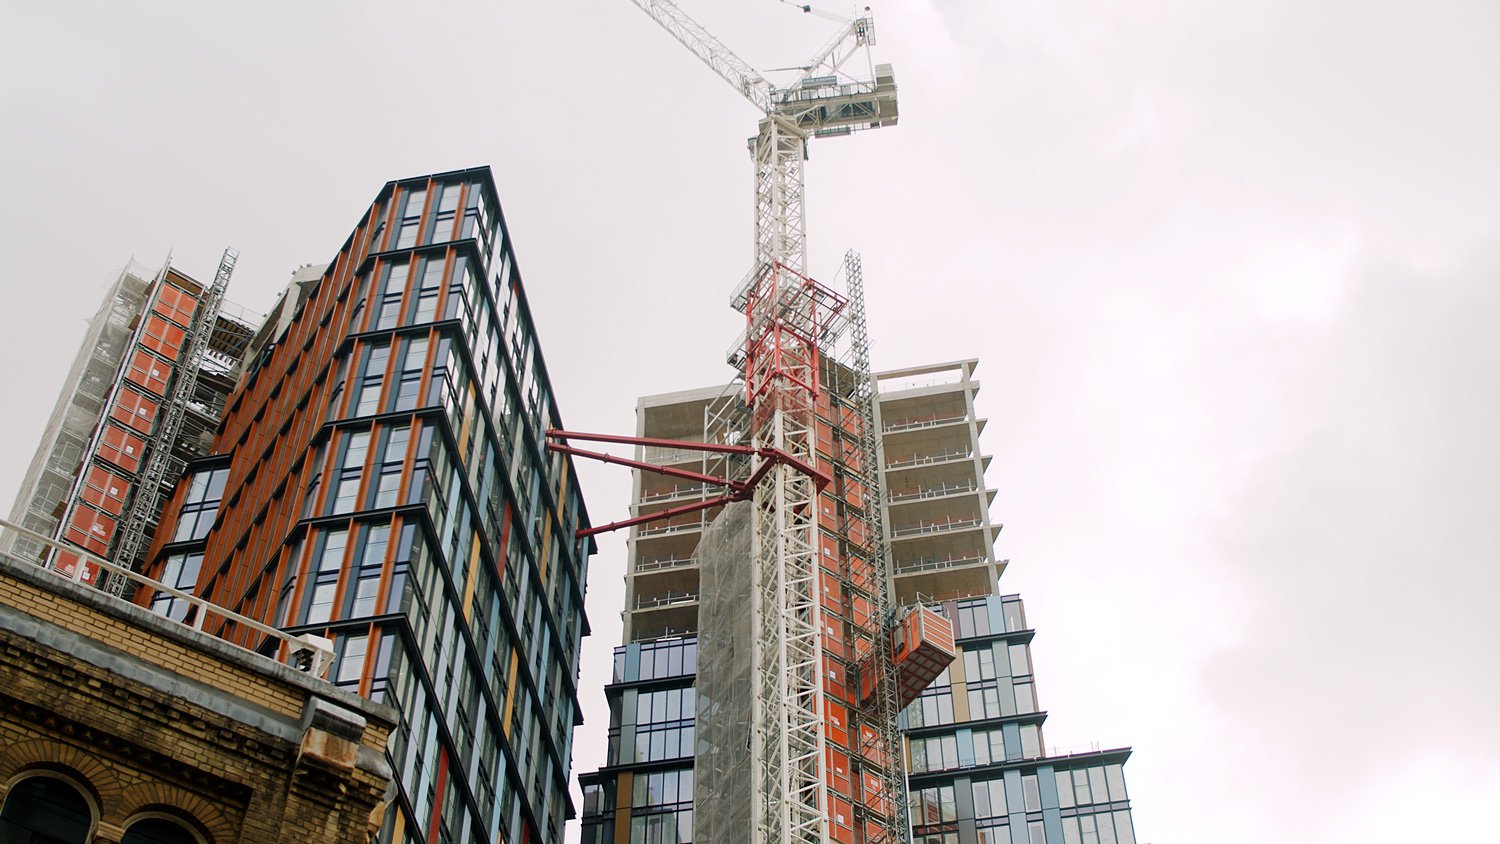 Bespoke RECO Common Tower at high-rise construction site next to a towercrane